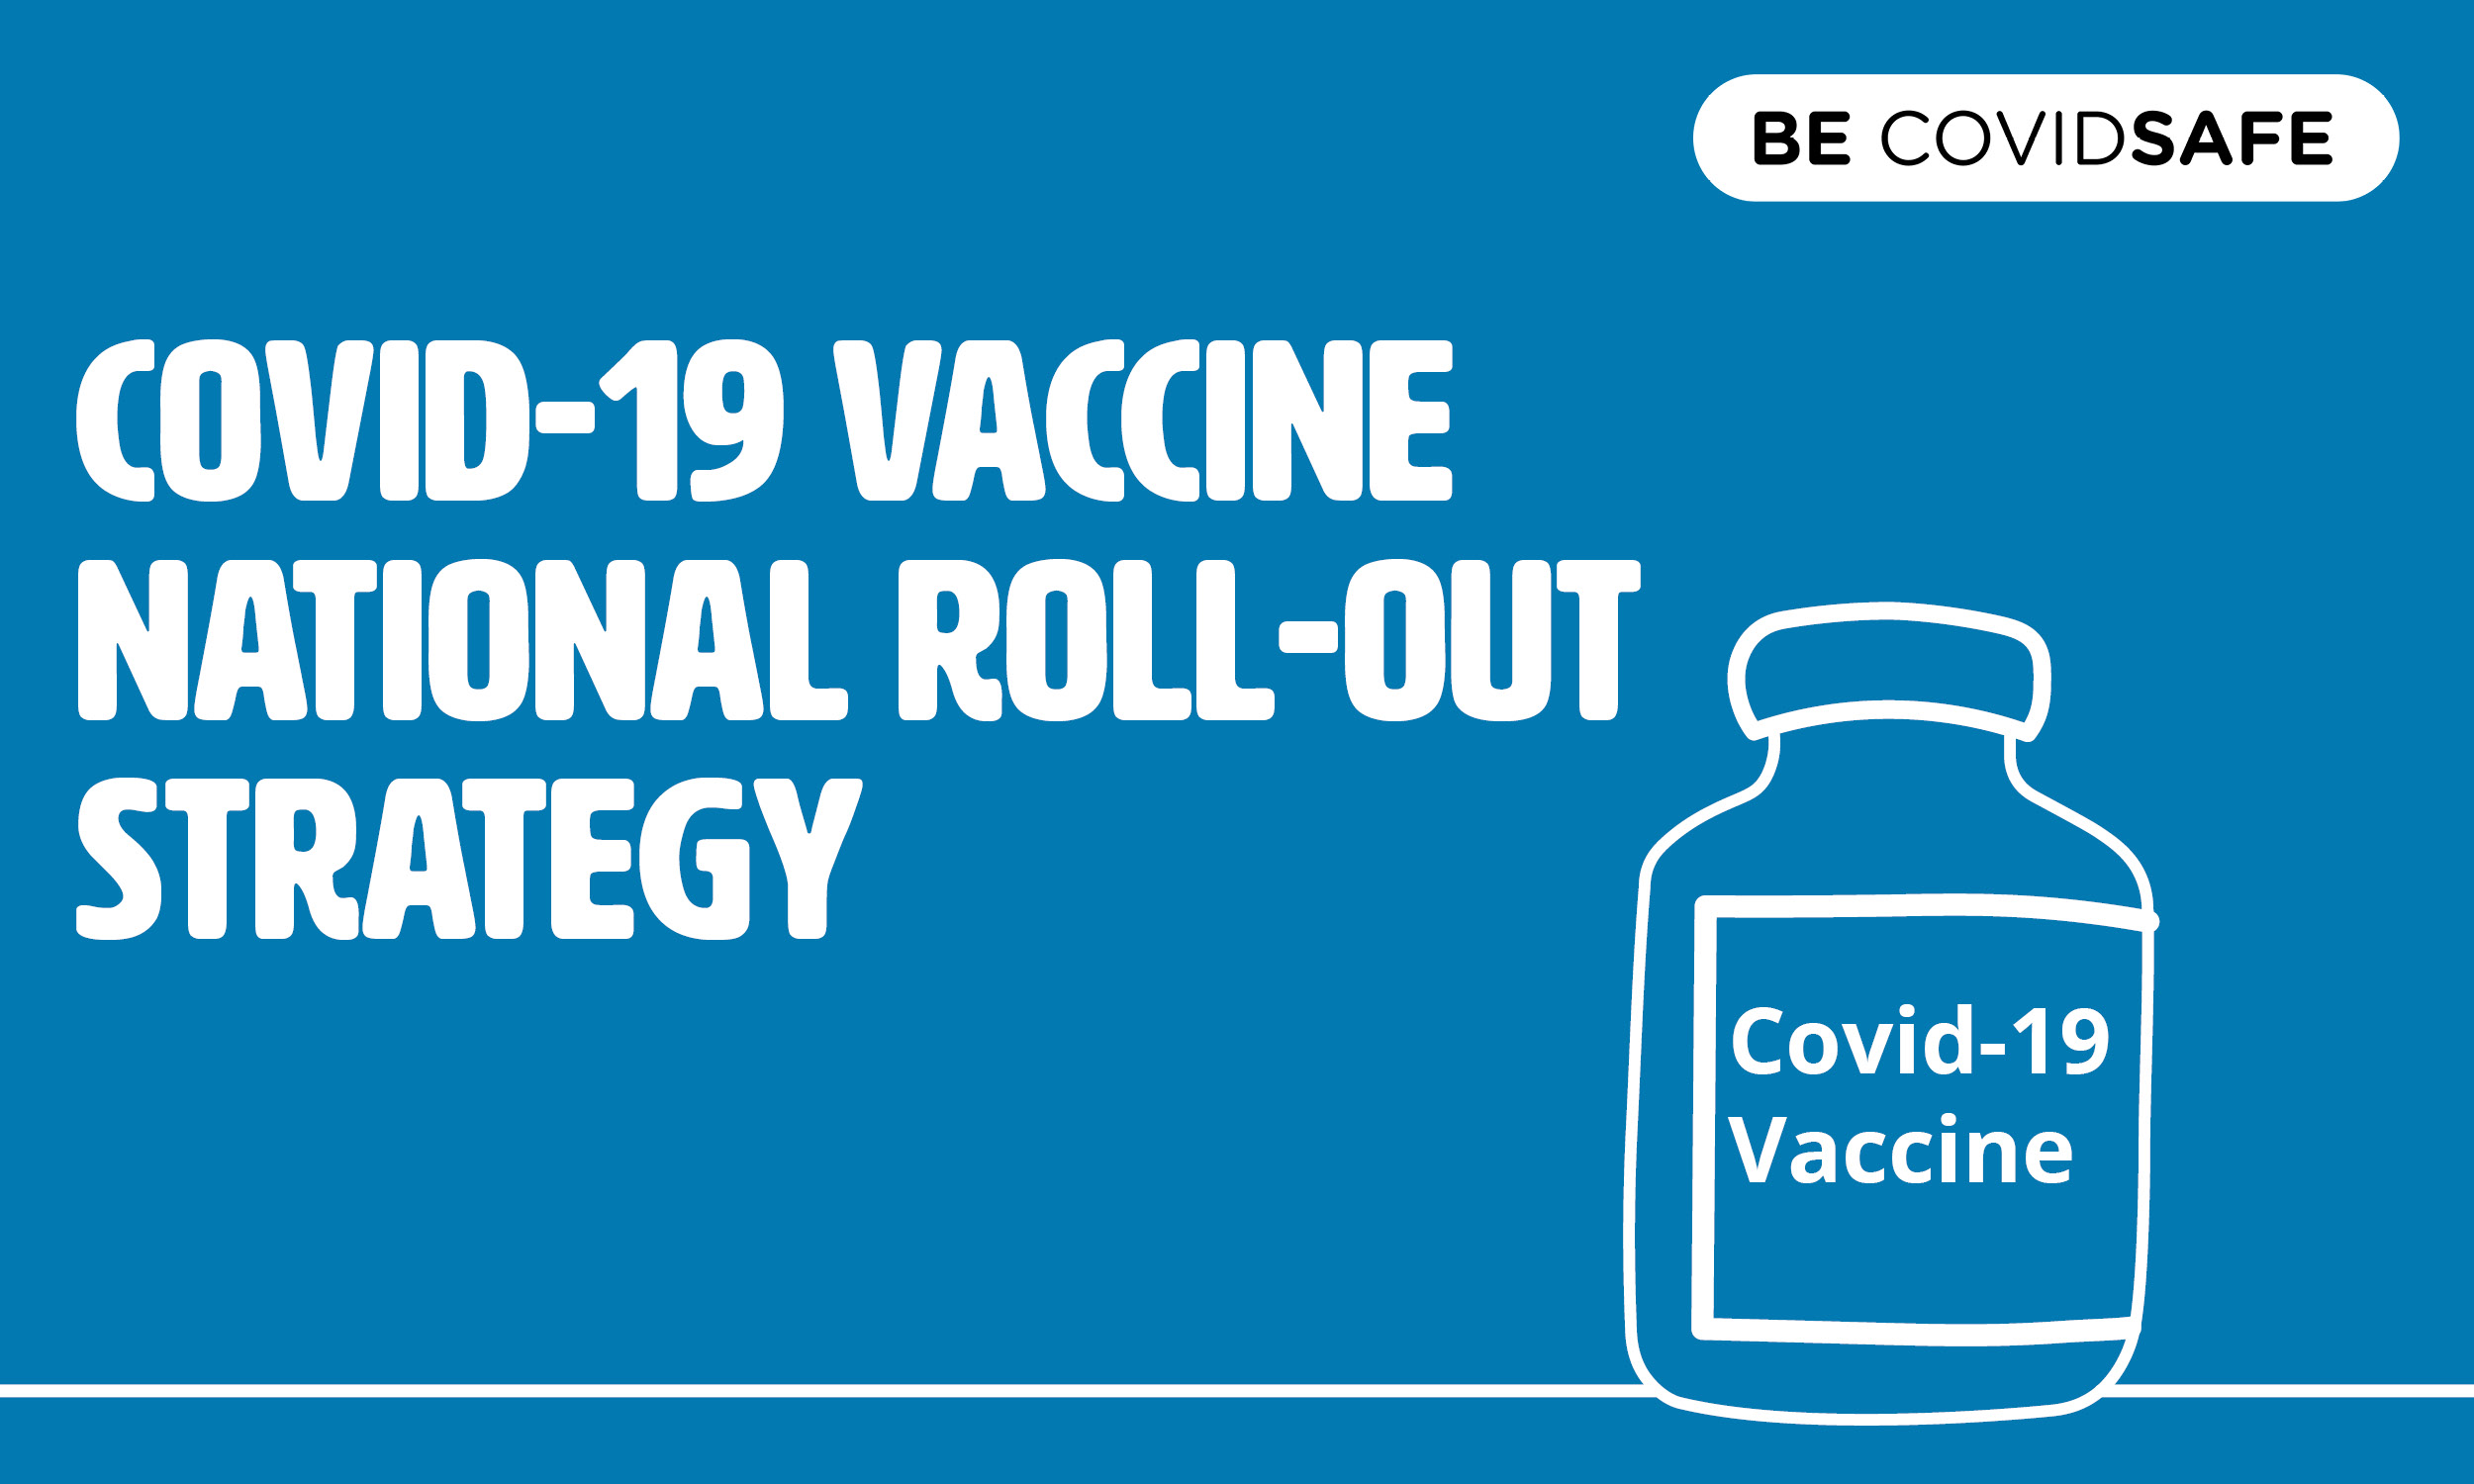 COVID-19 vaccine national rollout strategy